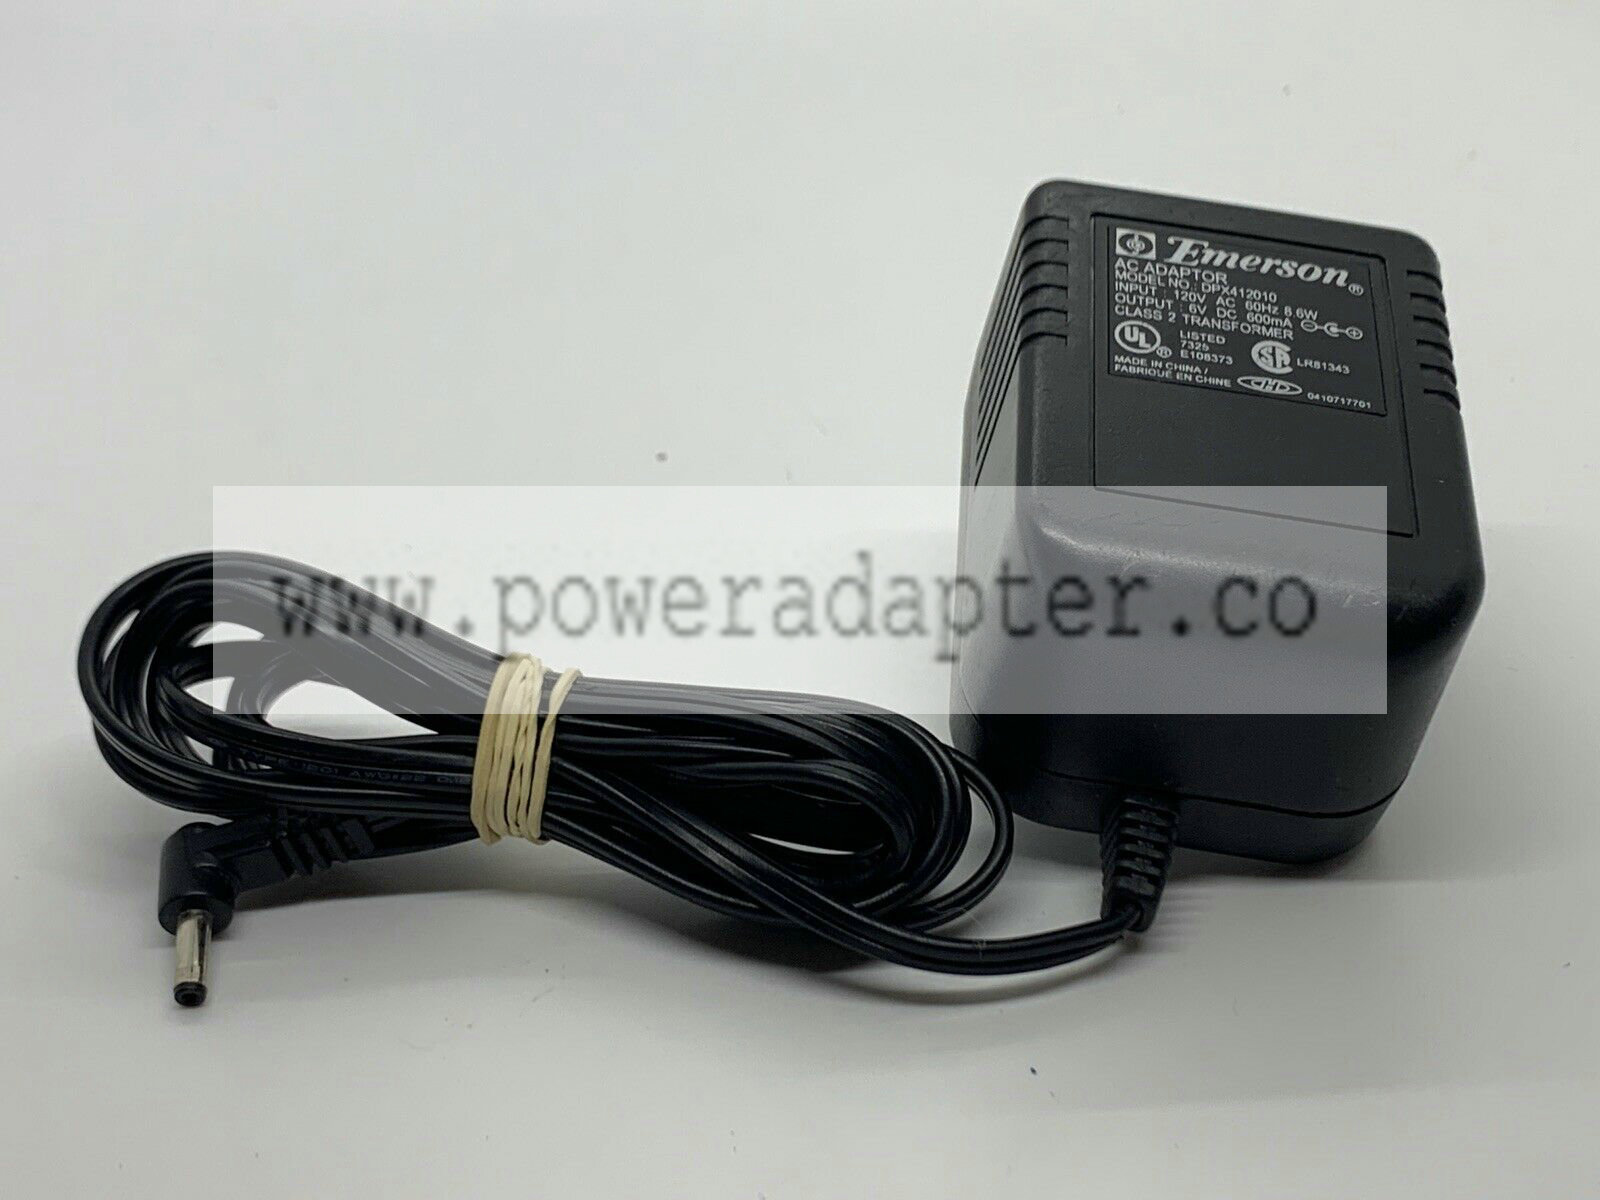 Emerson DPX412010 6v DC Adapter Power Supply Brand: Emerson MPN: Does Not Apply Output Voltage: 6V Please see the